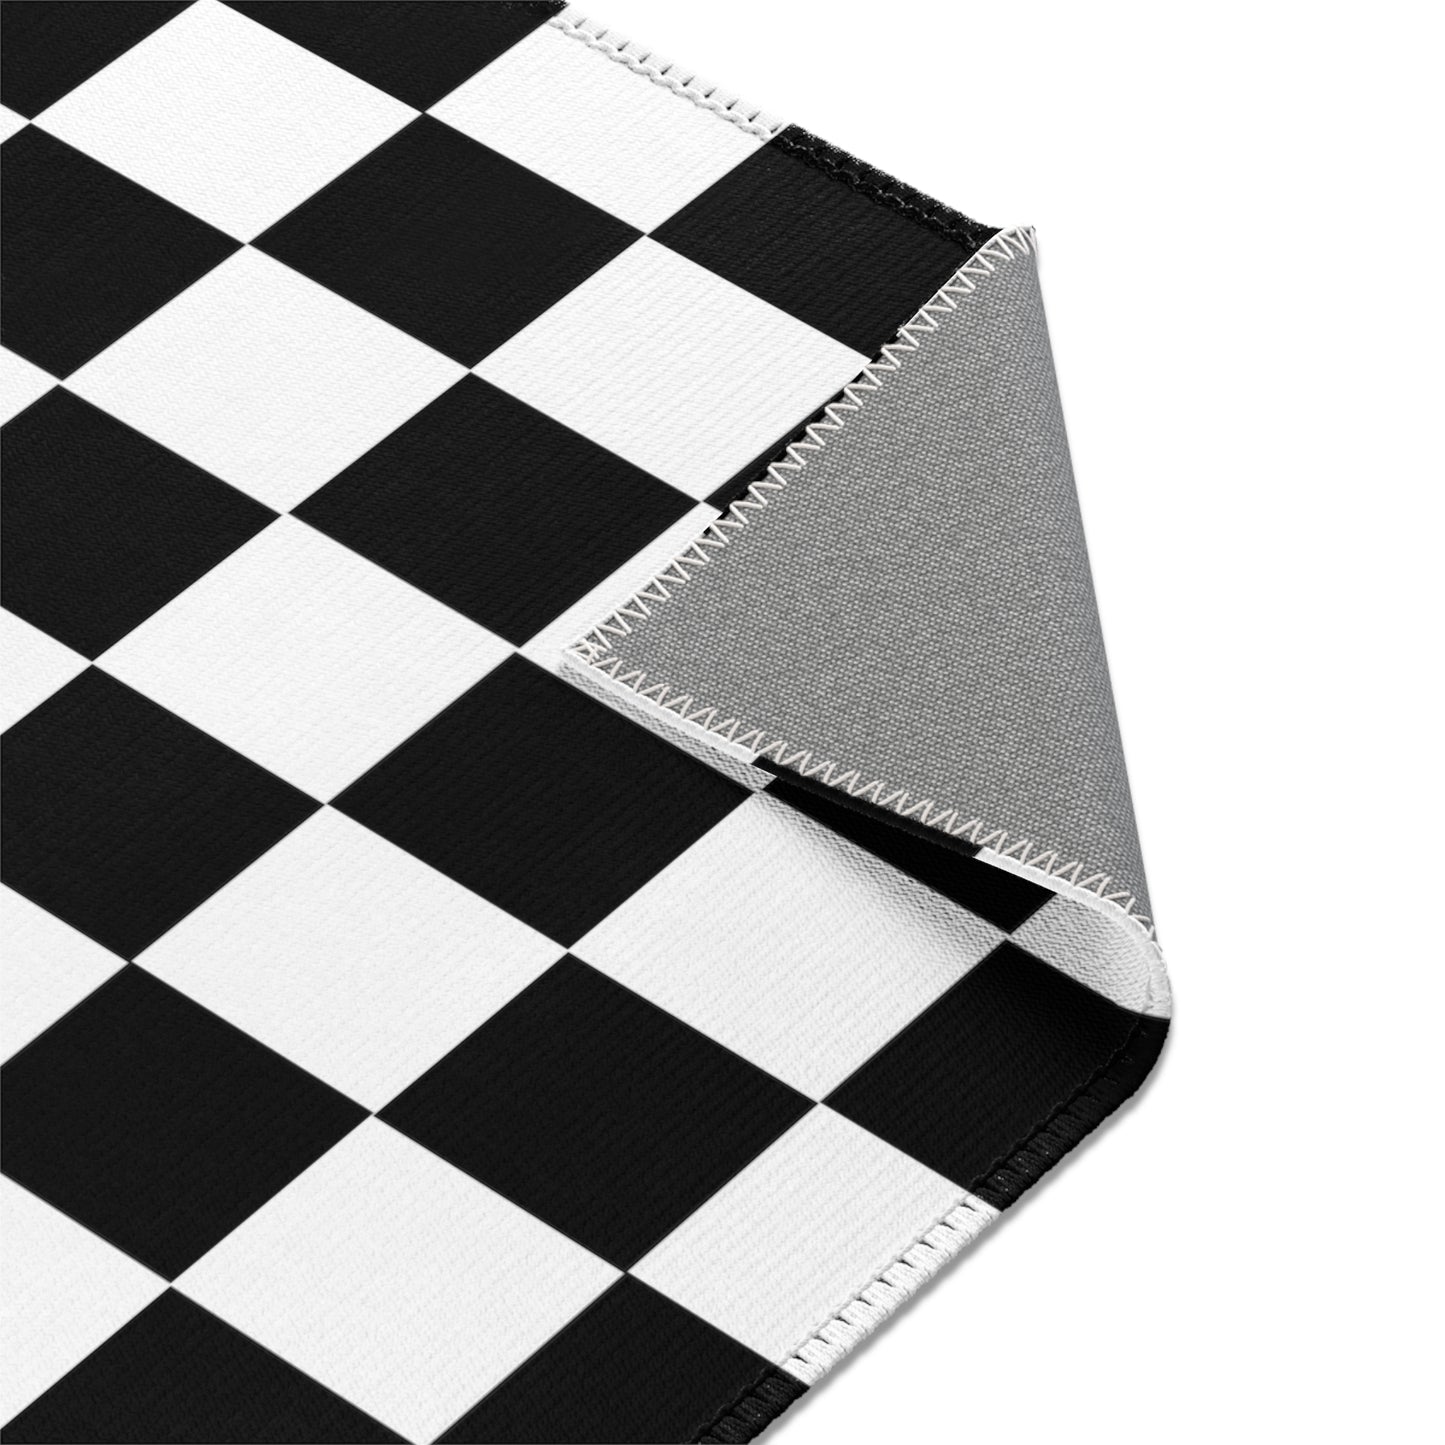 Black and White Checkered Area Rug, Cute Cool Living Room Rug, Minimalist Rug